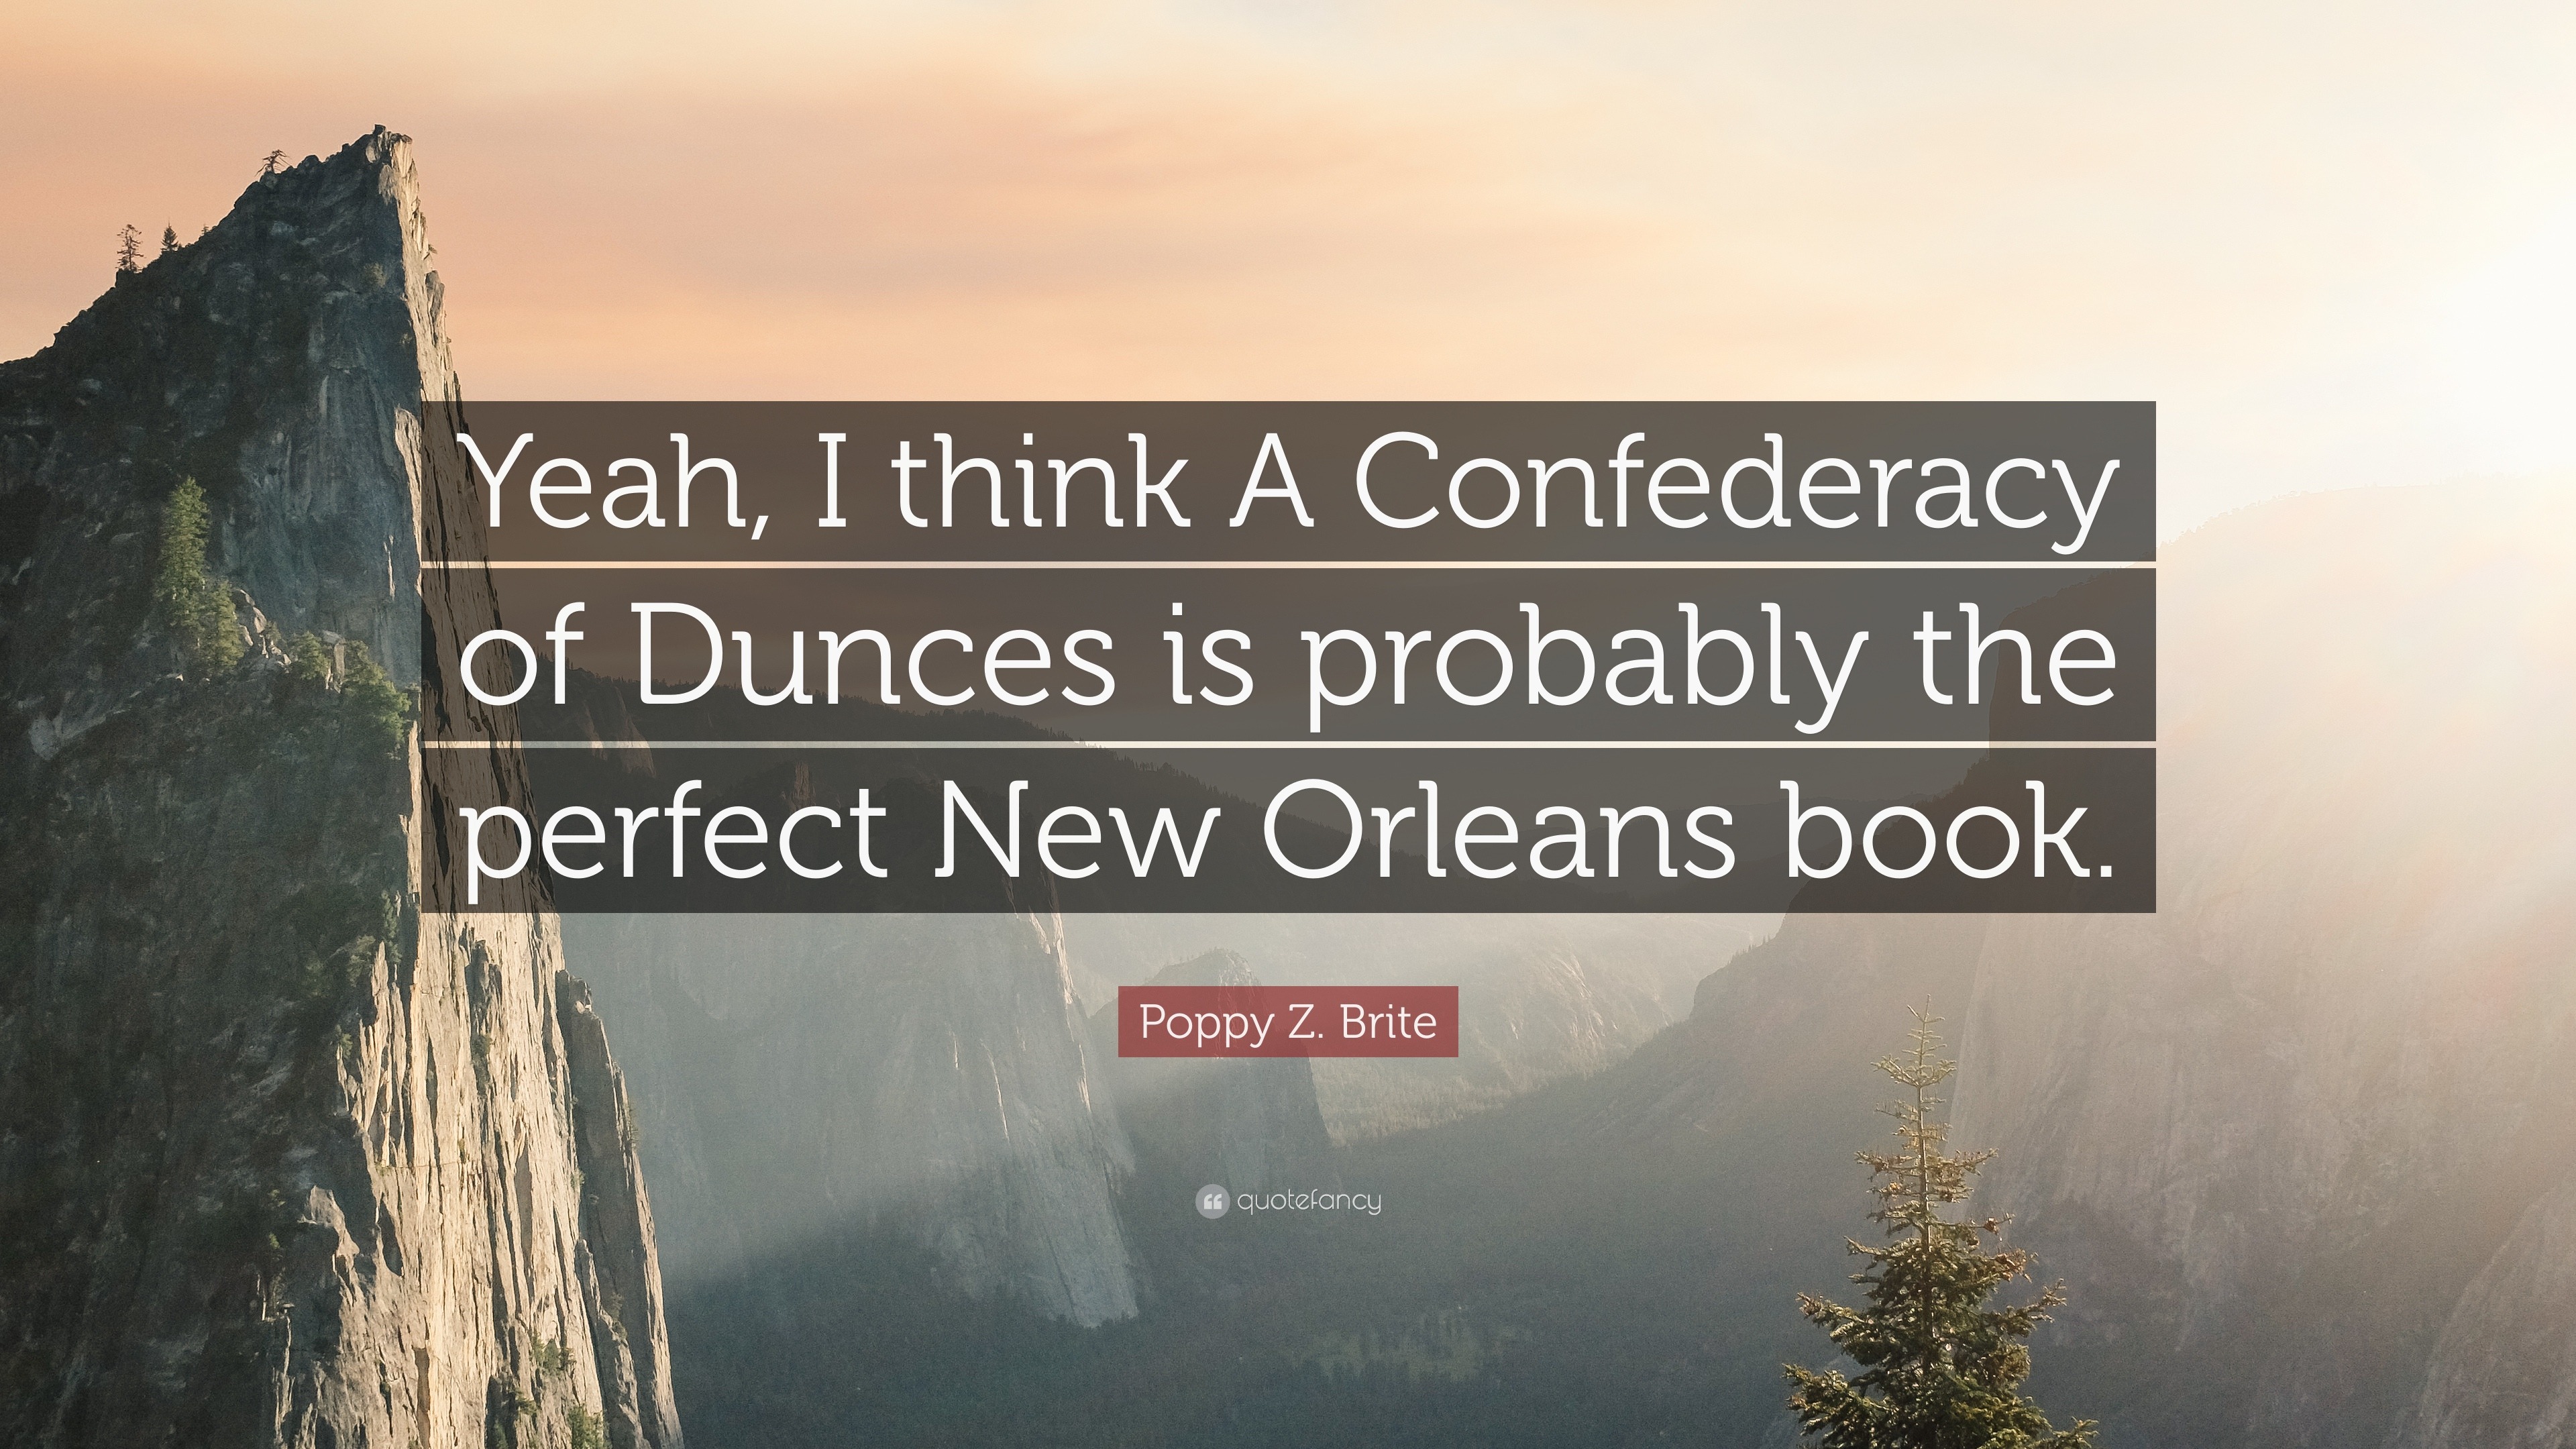 Poppy Z. Brite Quote: "Yeah, I think A Confederacy of Dunces is probably the perfect New Orleans ...